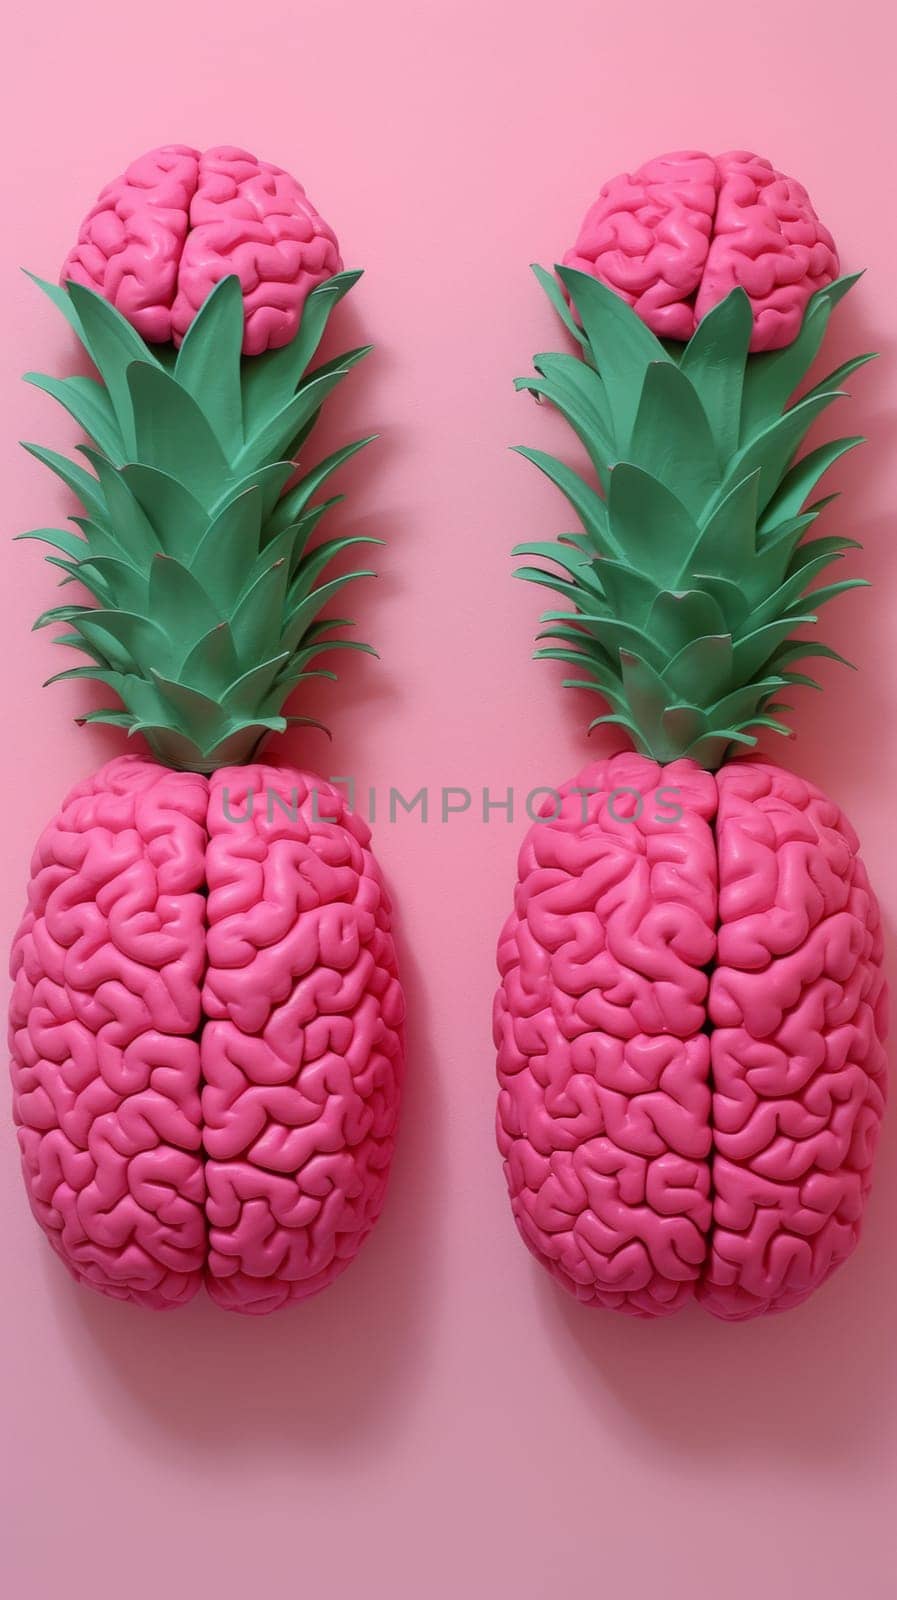 Two pink pineapples with brain shapes on them are shown